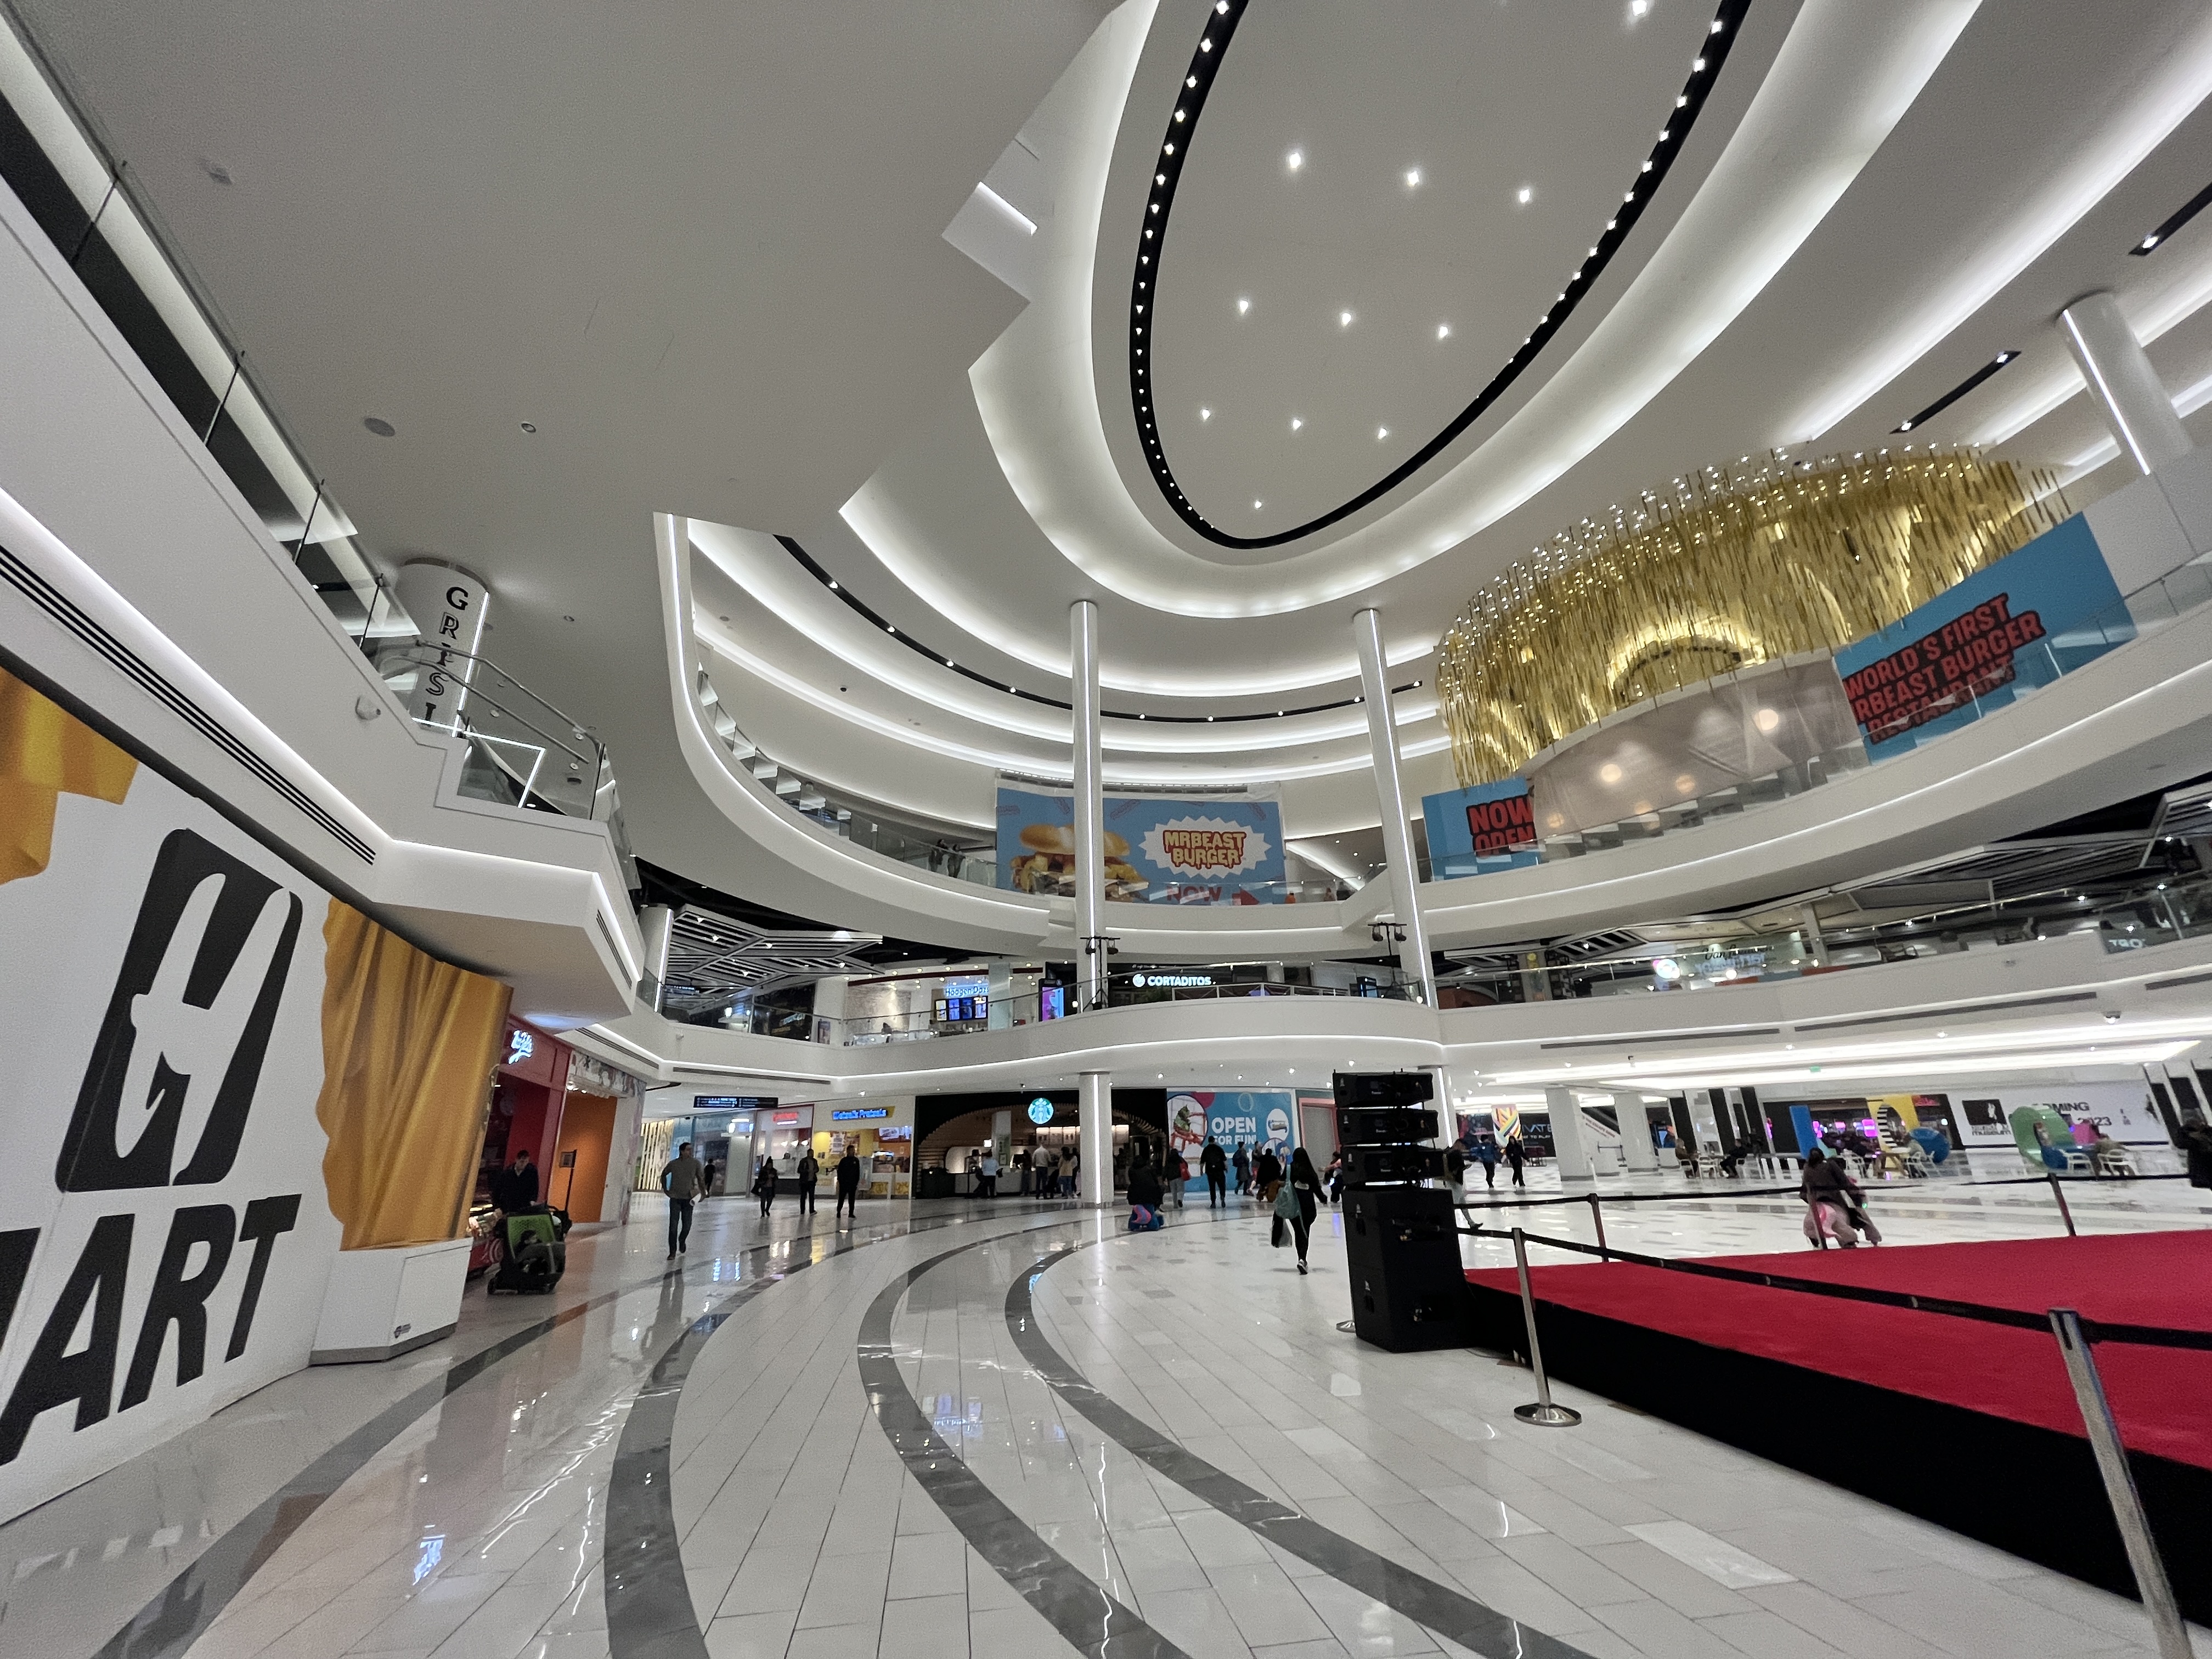 American Dream - An Indoor Retail & Entertainment Complex in the